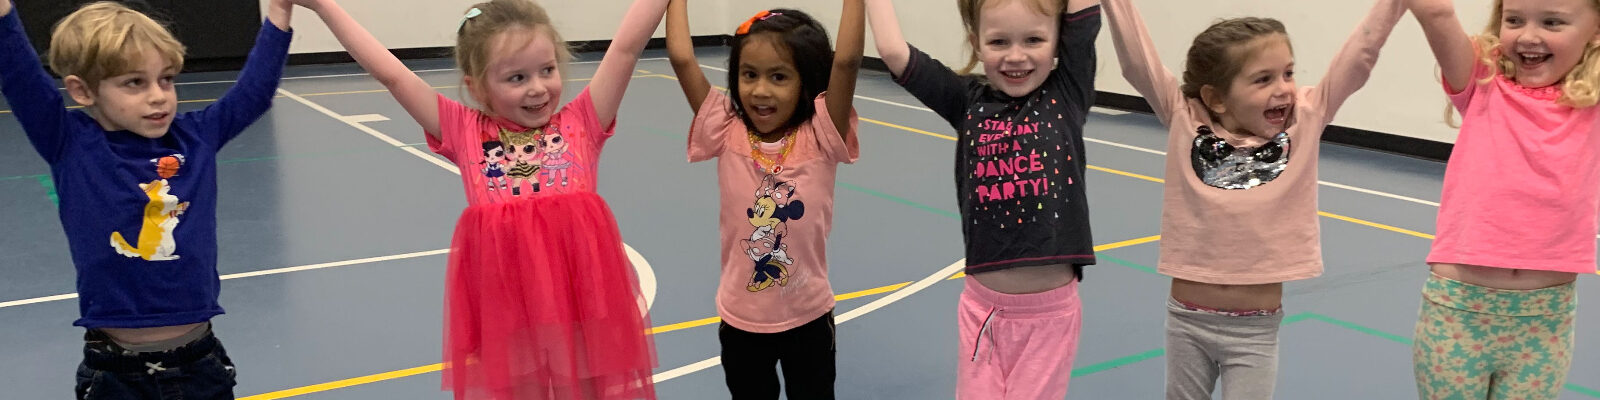 programs for kids at north penn ymca